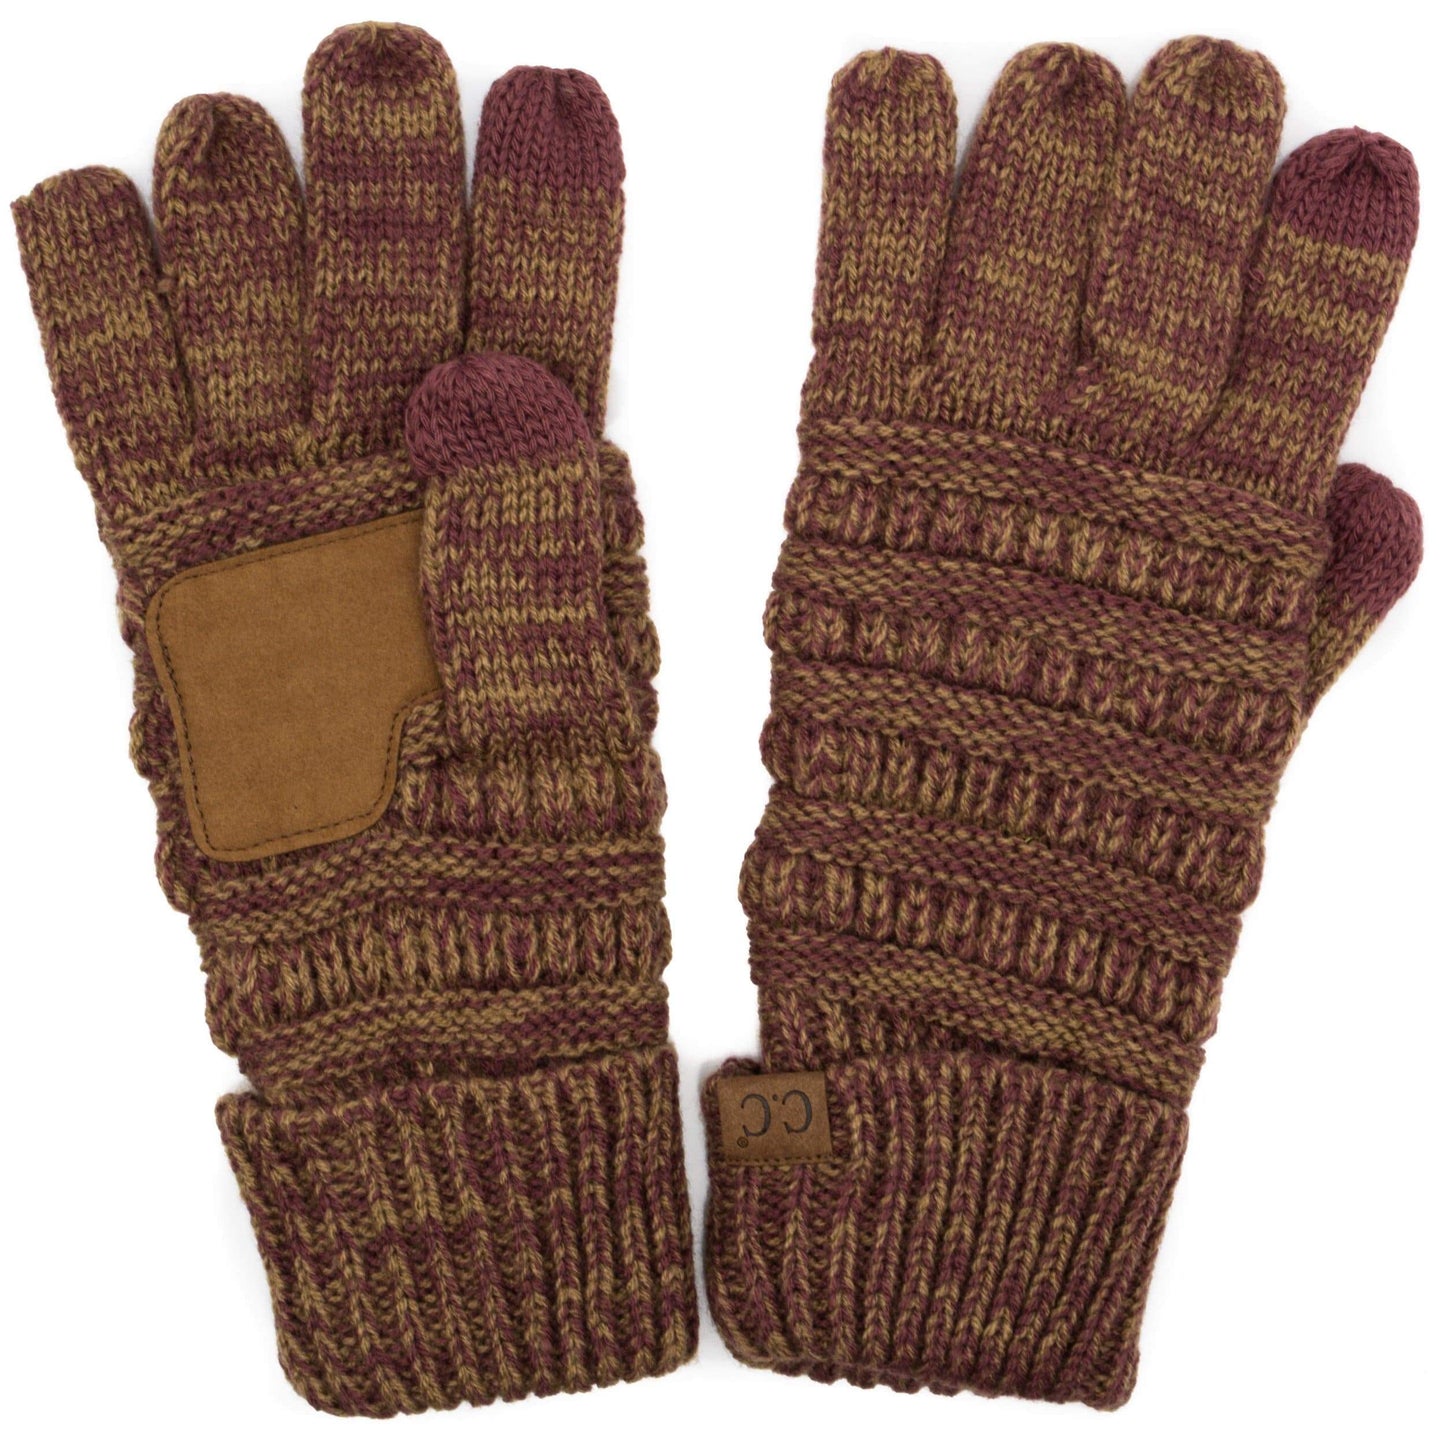 C.C Apparel Plum/Camel C.C Unisex Cable Knit Winter Warm Anti-Slip Two-Toned Touchscreen Texting Gloves